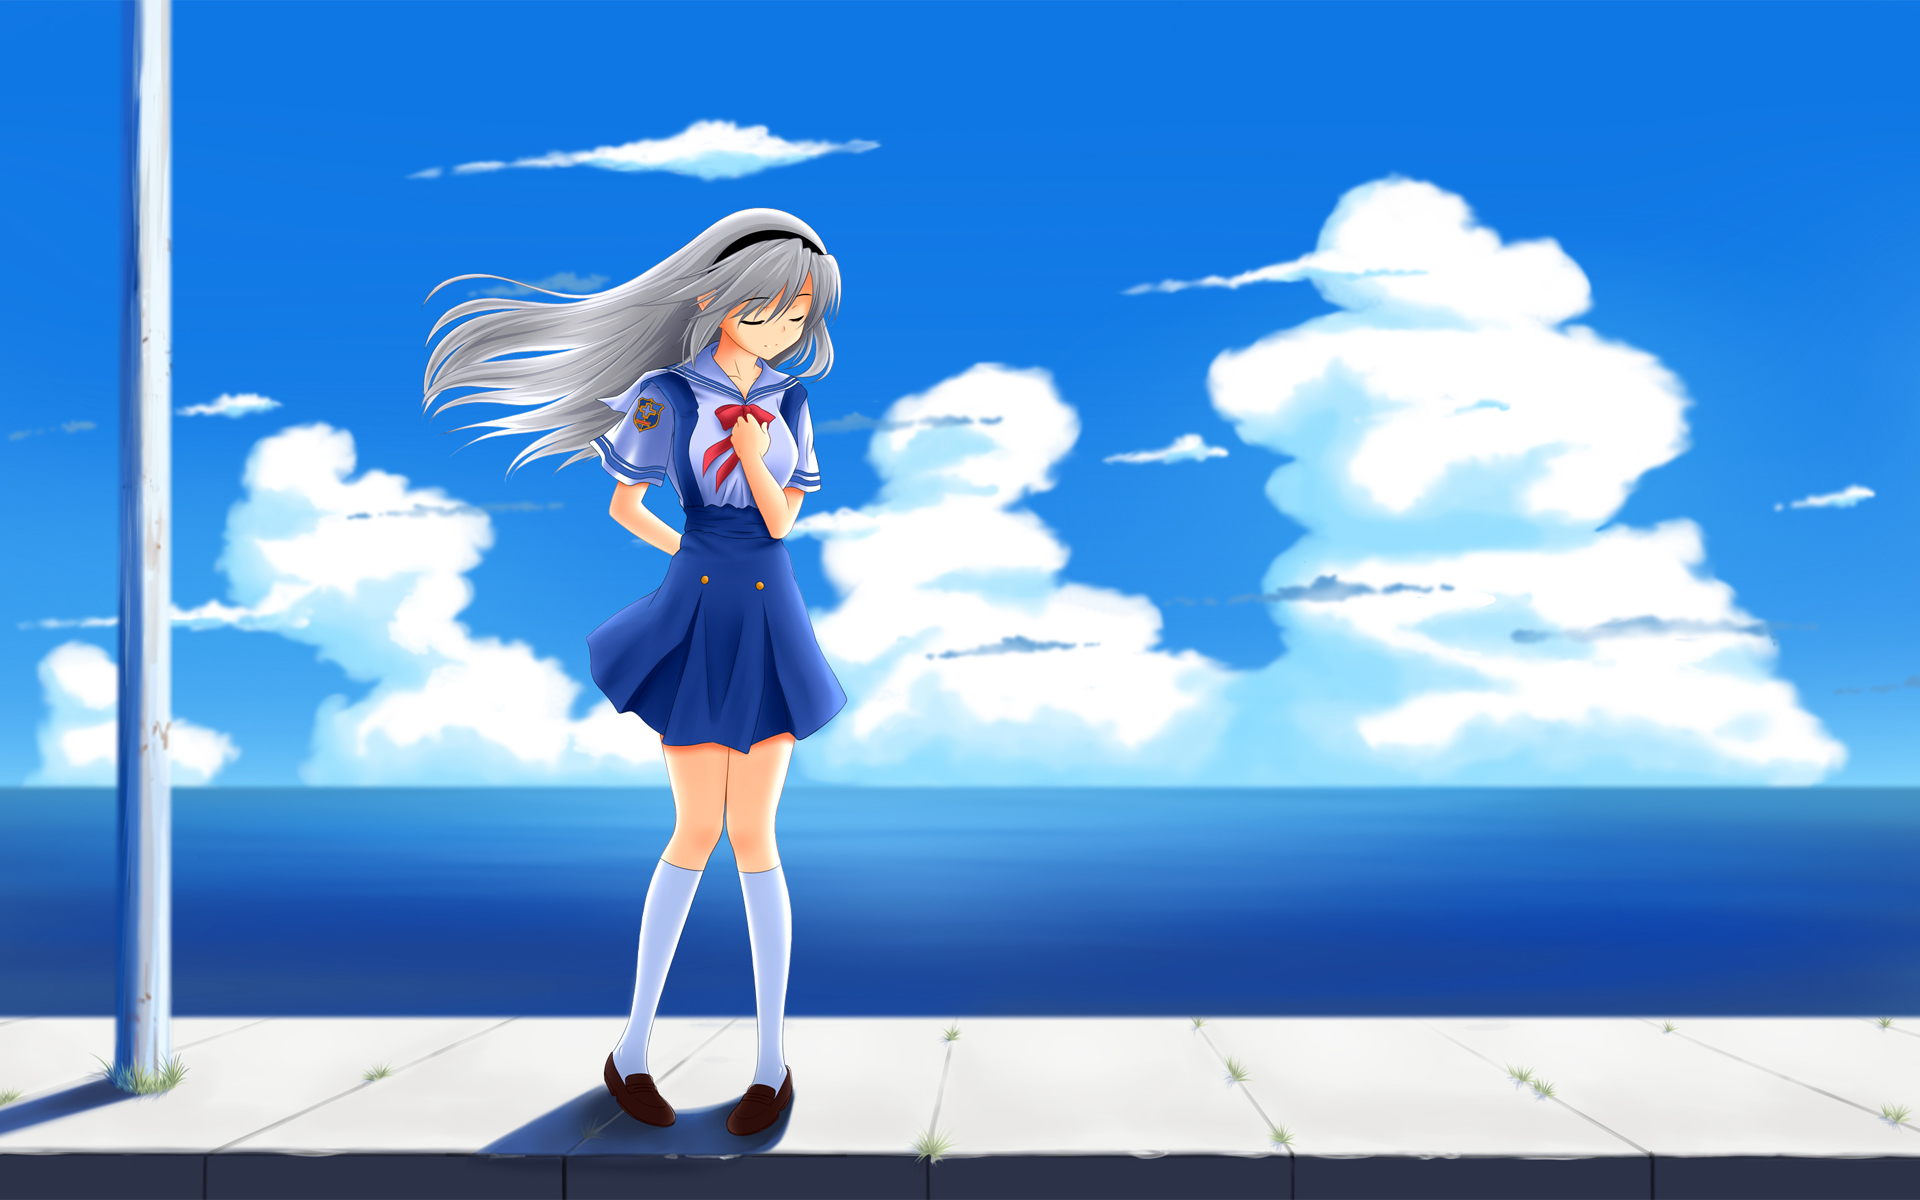 Clannad, Sakagami Tomoyo, Anime, Anime Girls, Clannad After Story Wallpaper